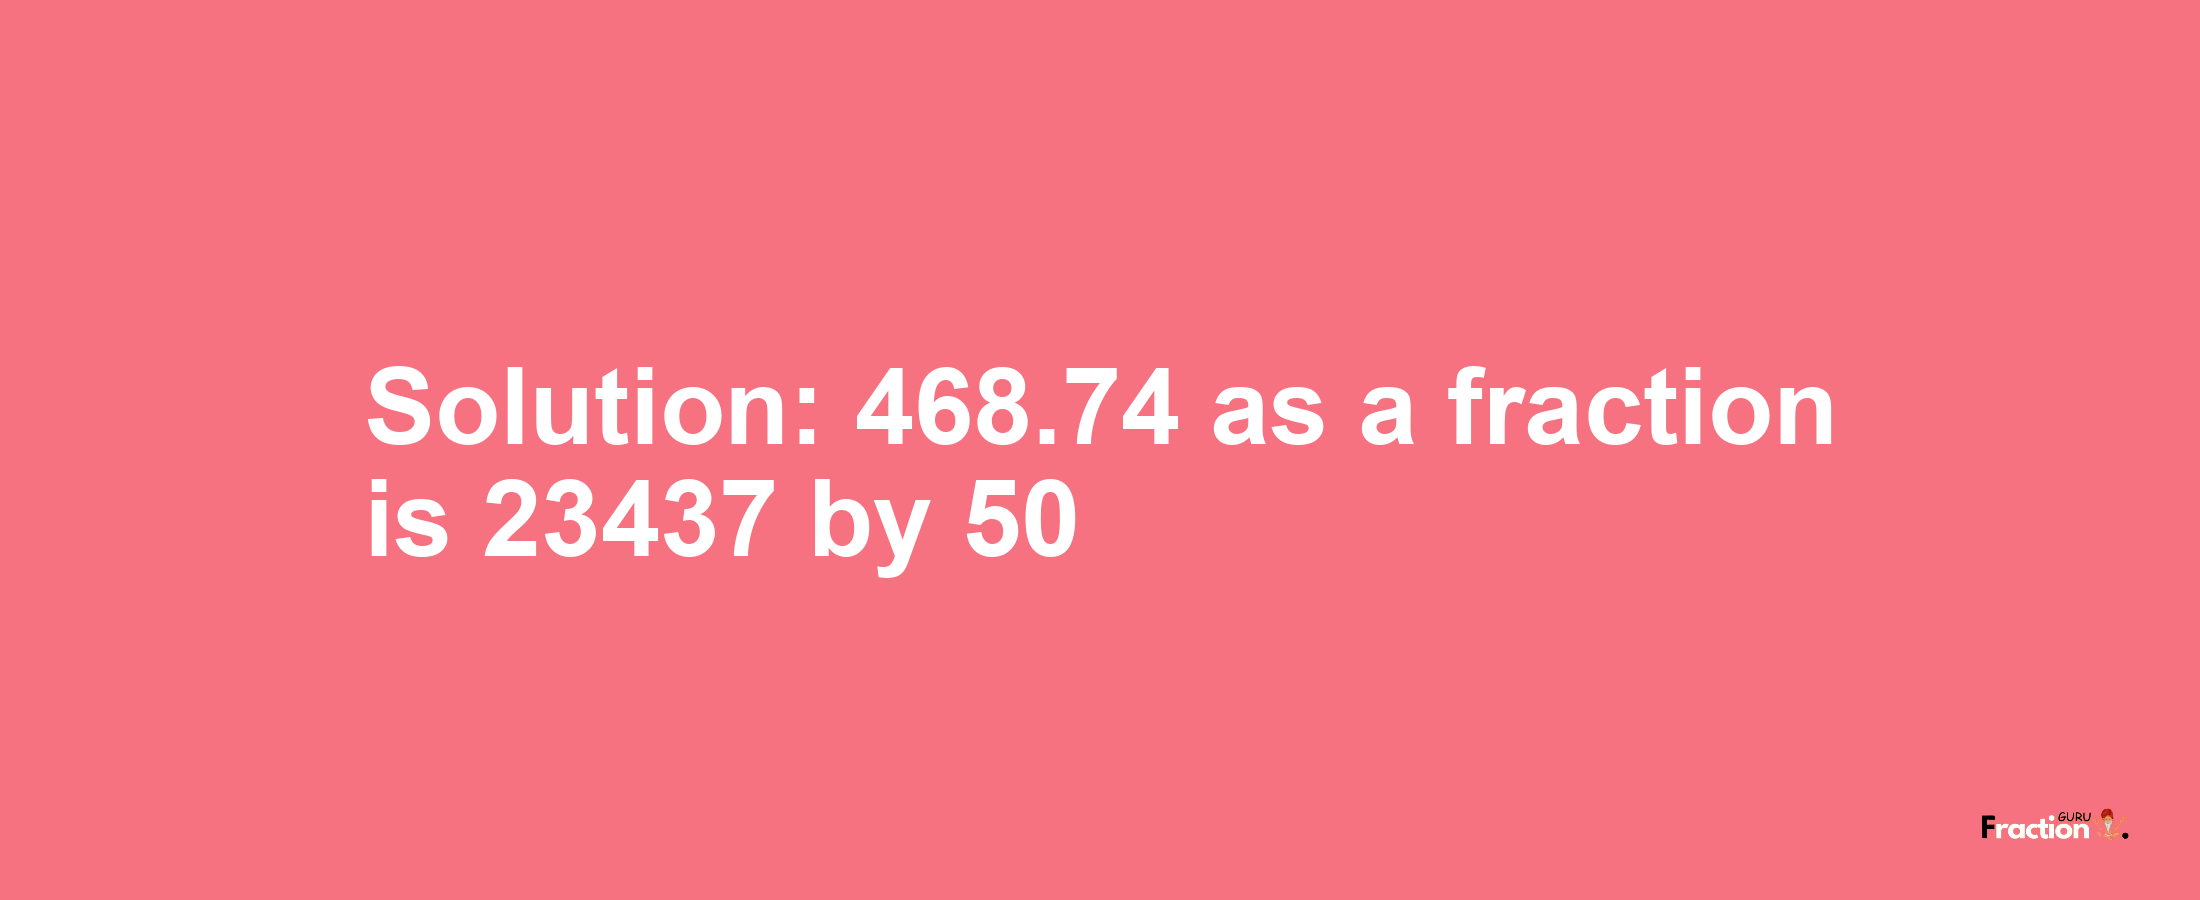 Solution:468.74 as a fraction is 23437/50